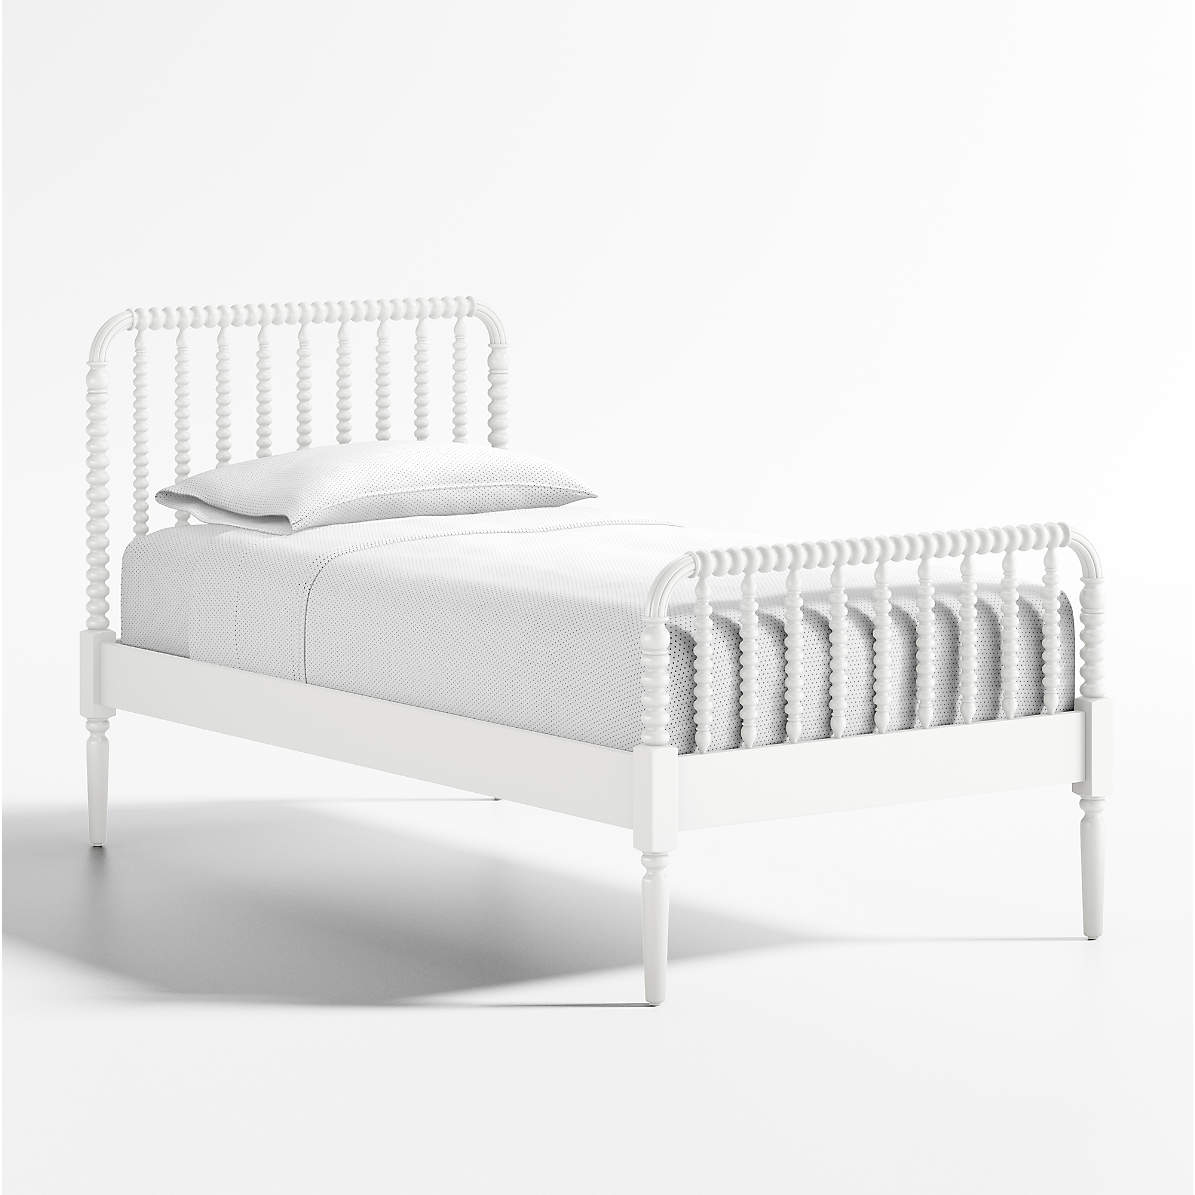 Jenny Lind Kids Bed White Crate, Jenny Lind Bunk Bed